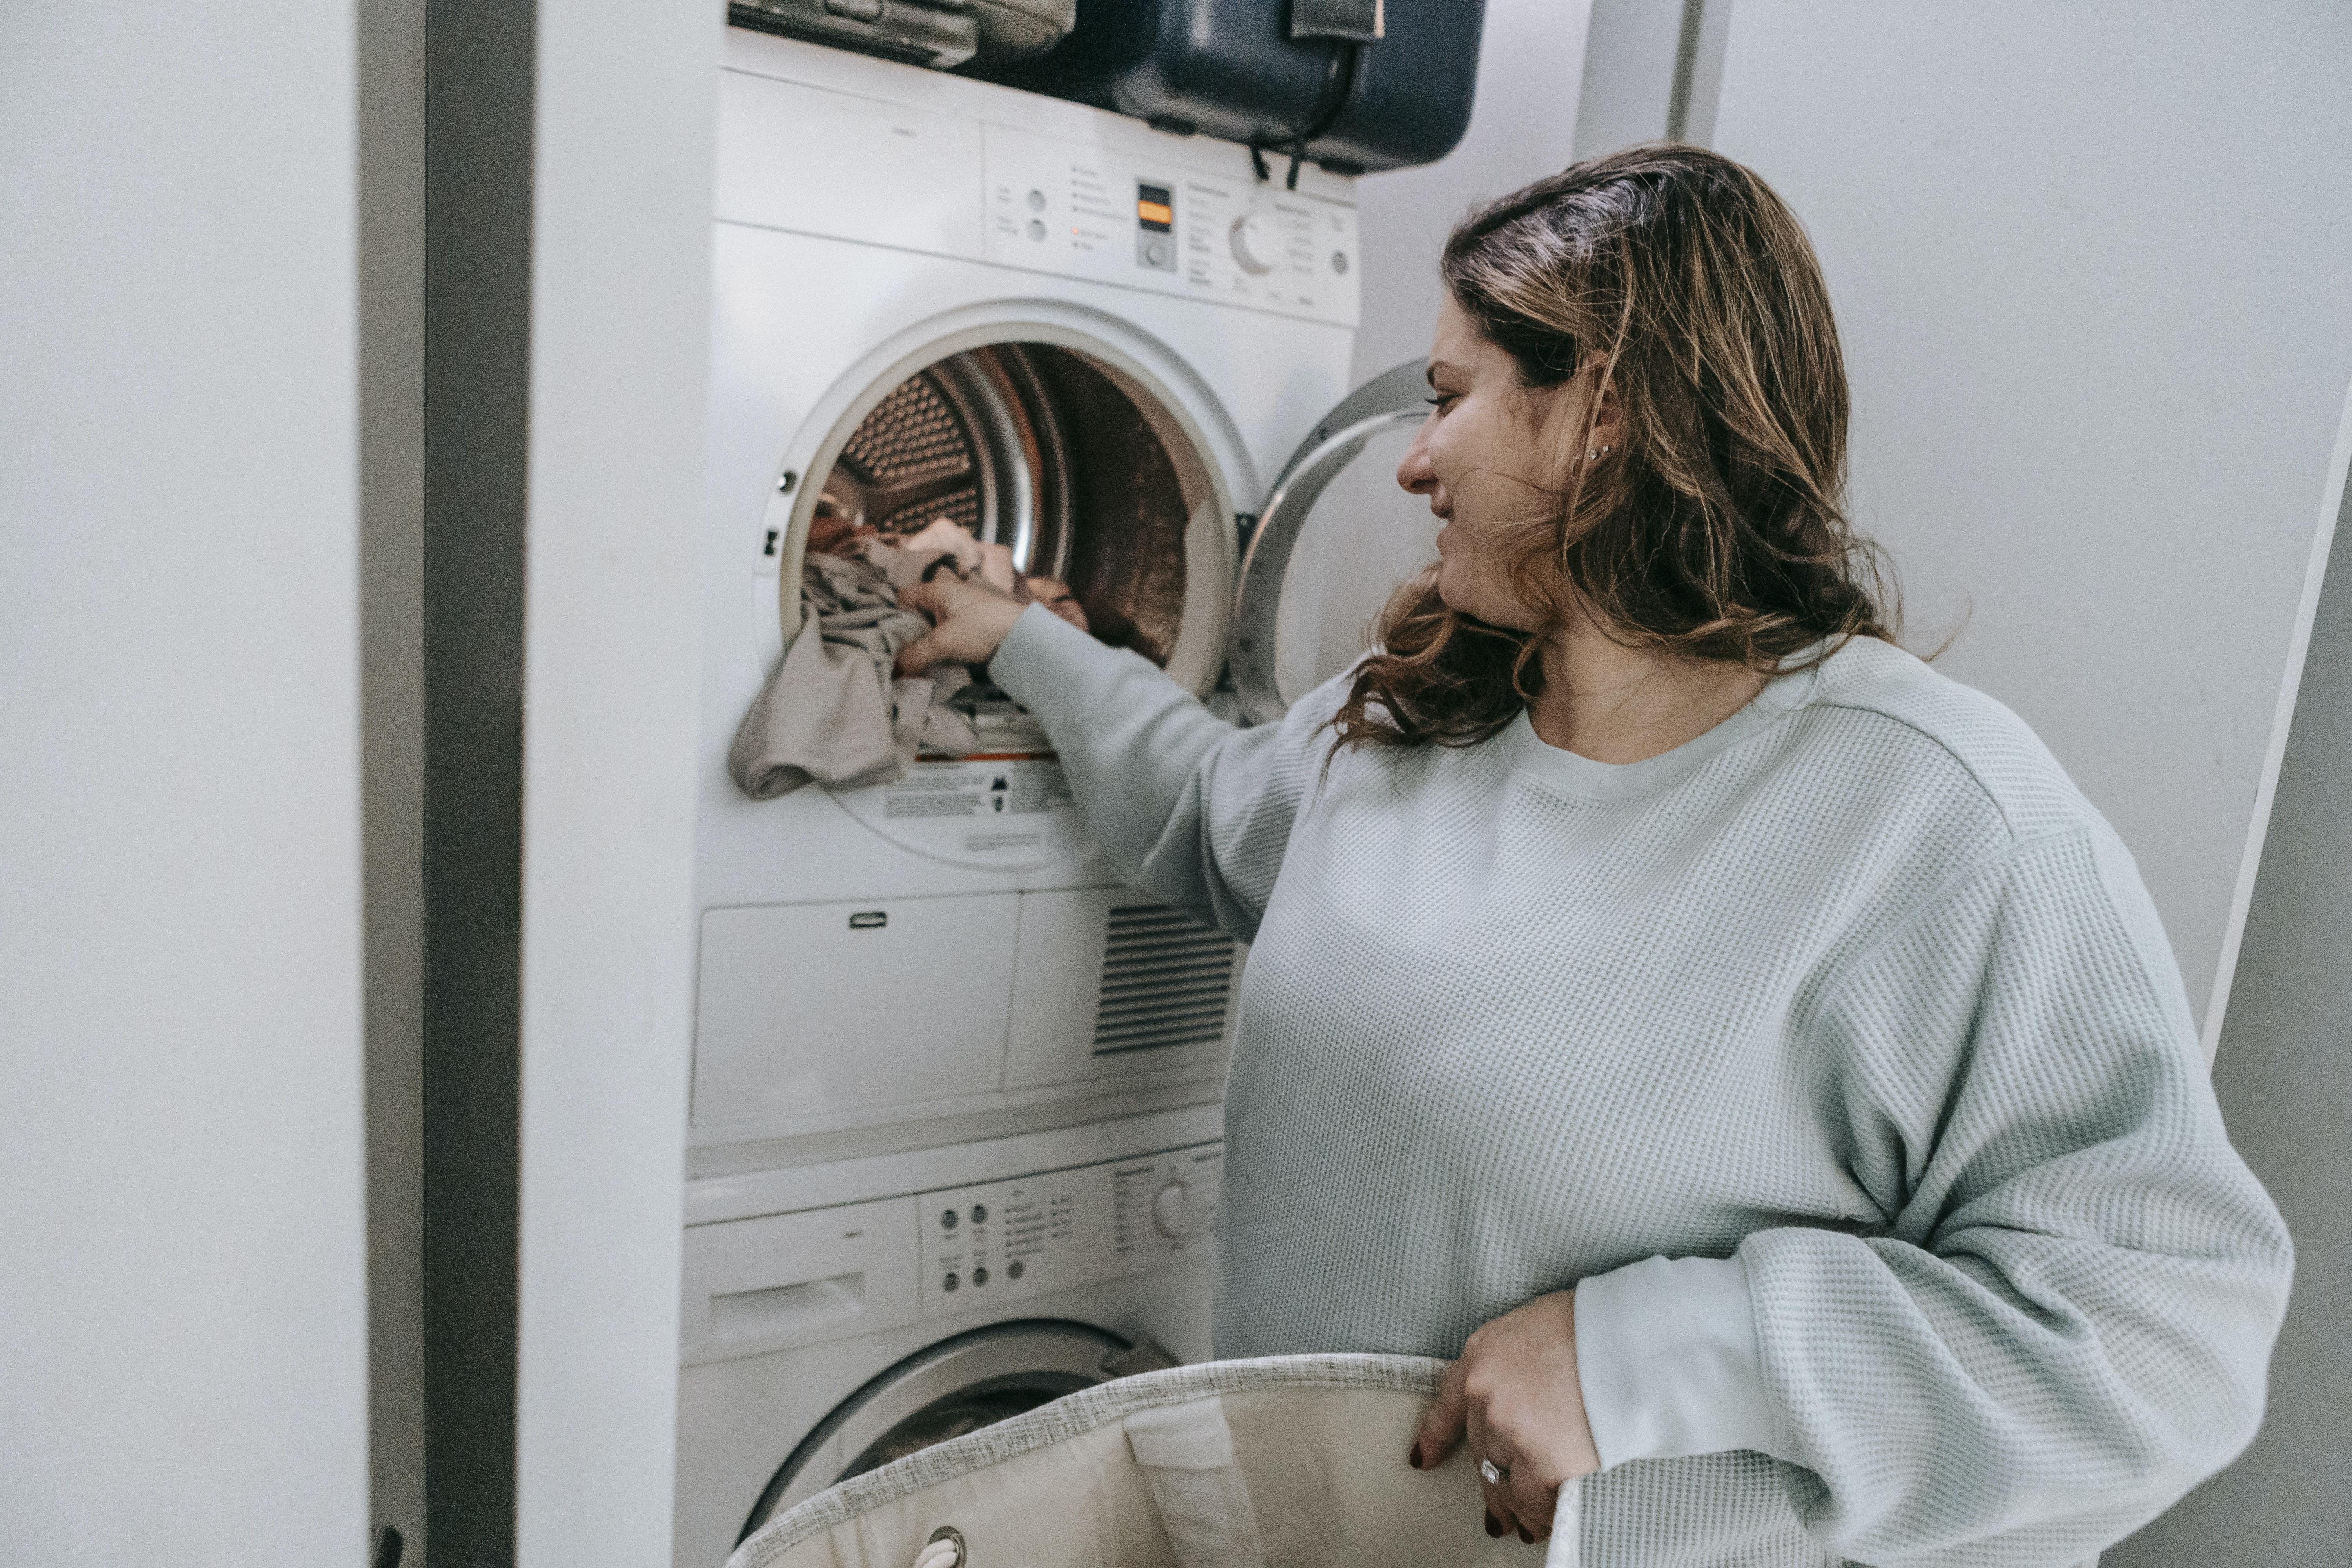 How To Find Lost Items In Dryer 